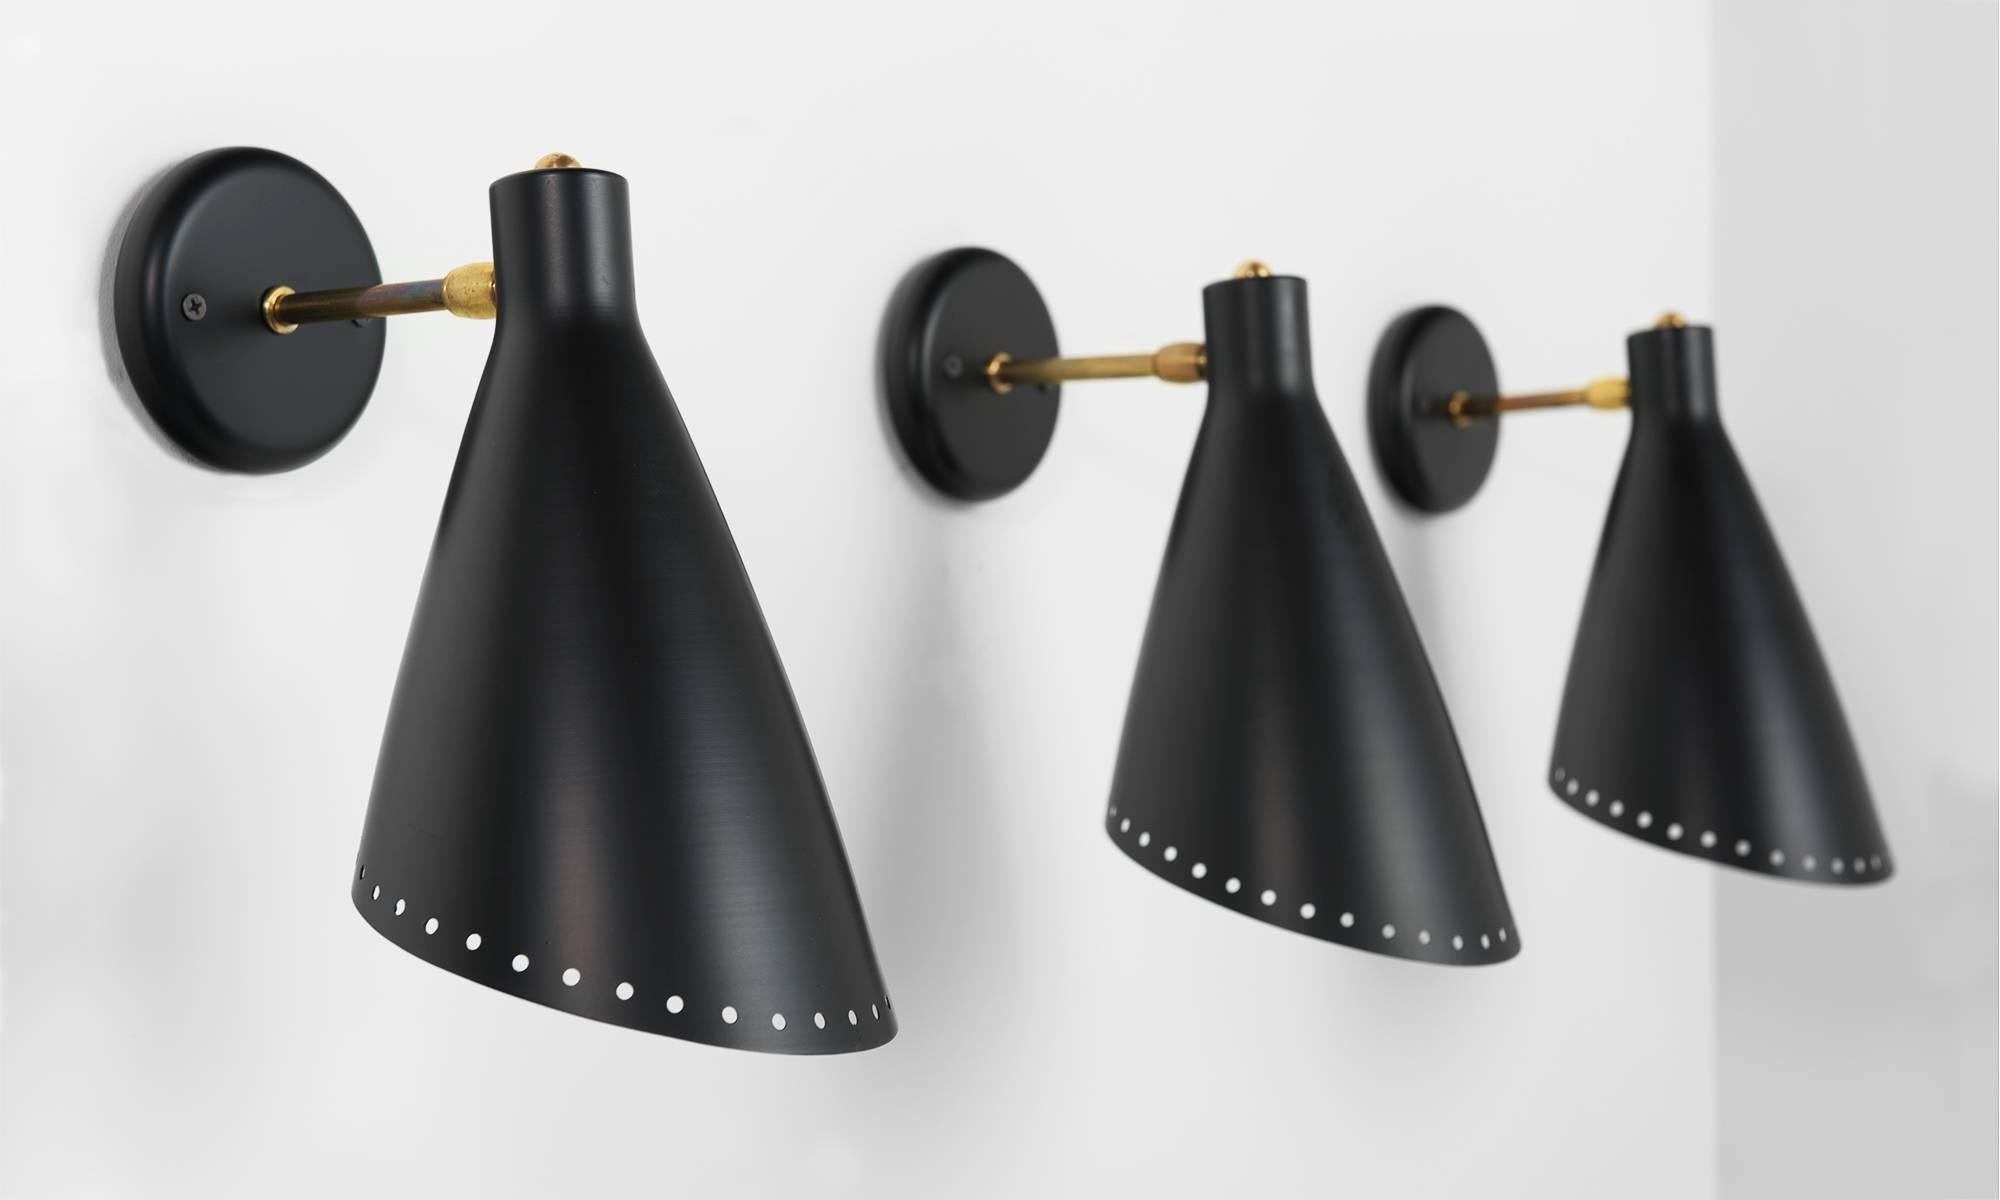 Adjustable Brass and Black Metal Sconce, circa 1950

Cone shade features a perforated motif and is adjustable at attached brass arm.